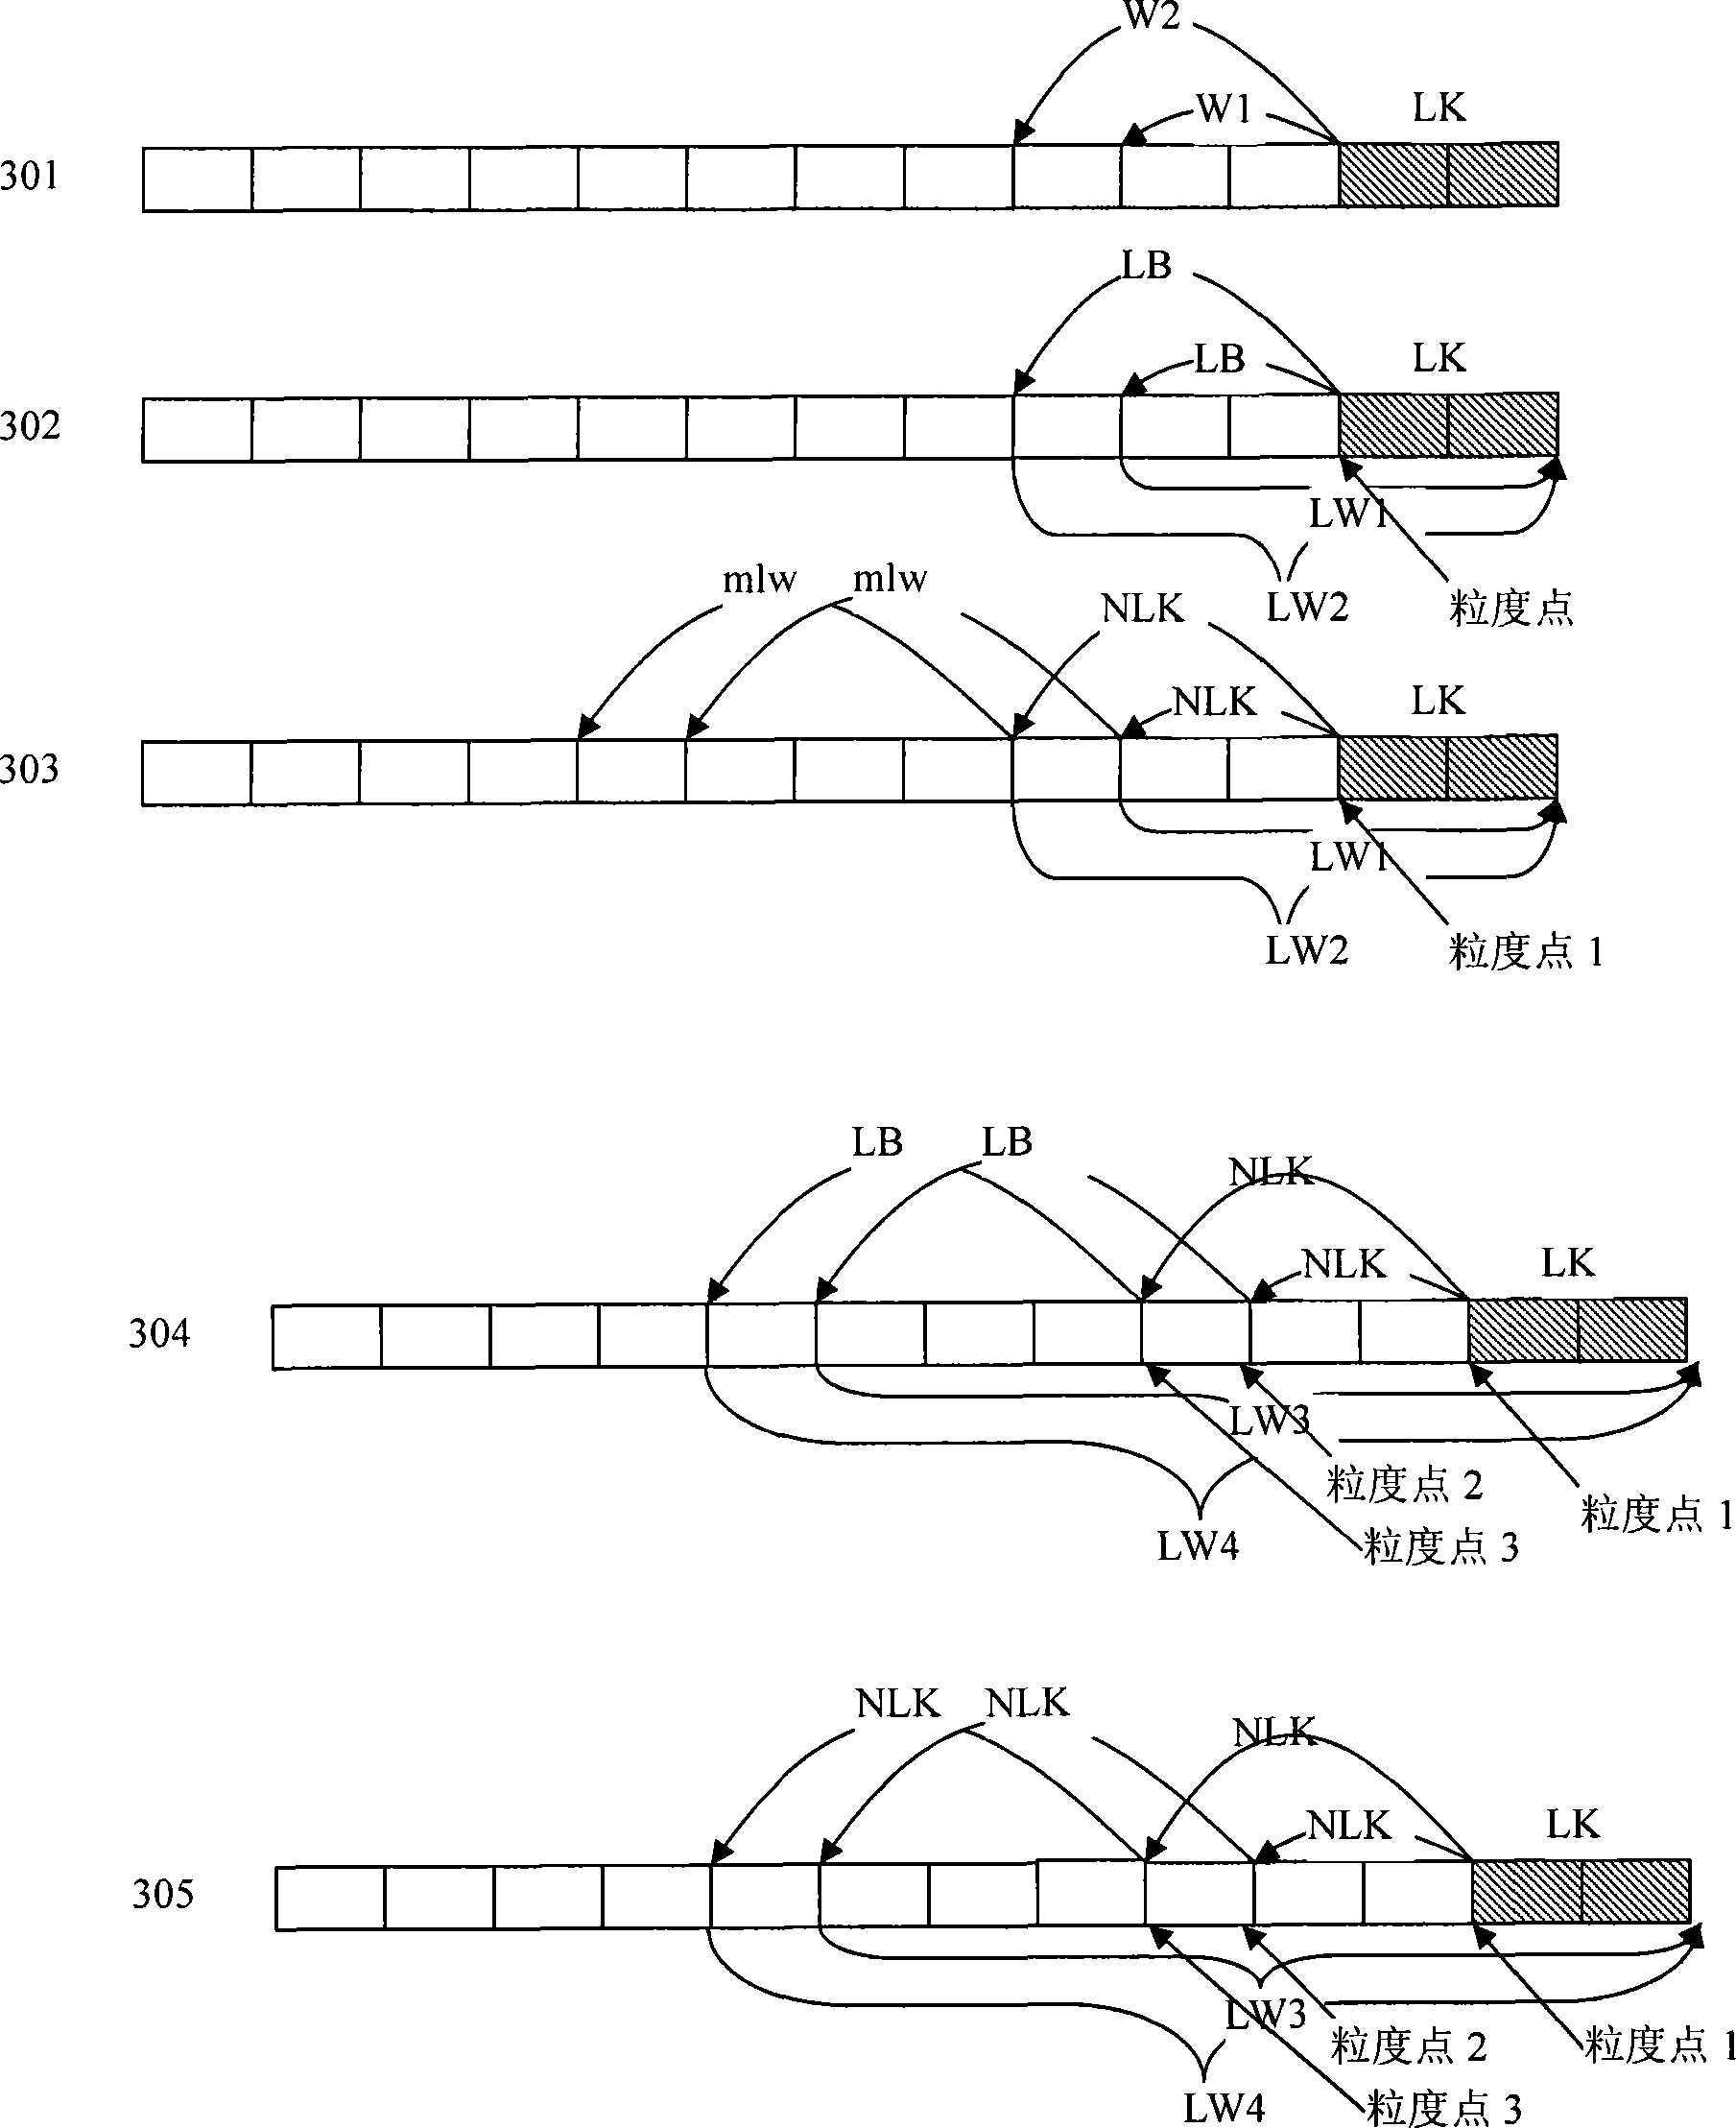 Method and apparatus for cutting large and small granularity of Chinese language text